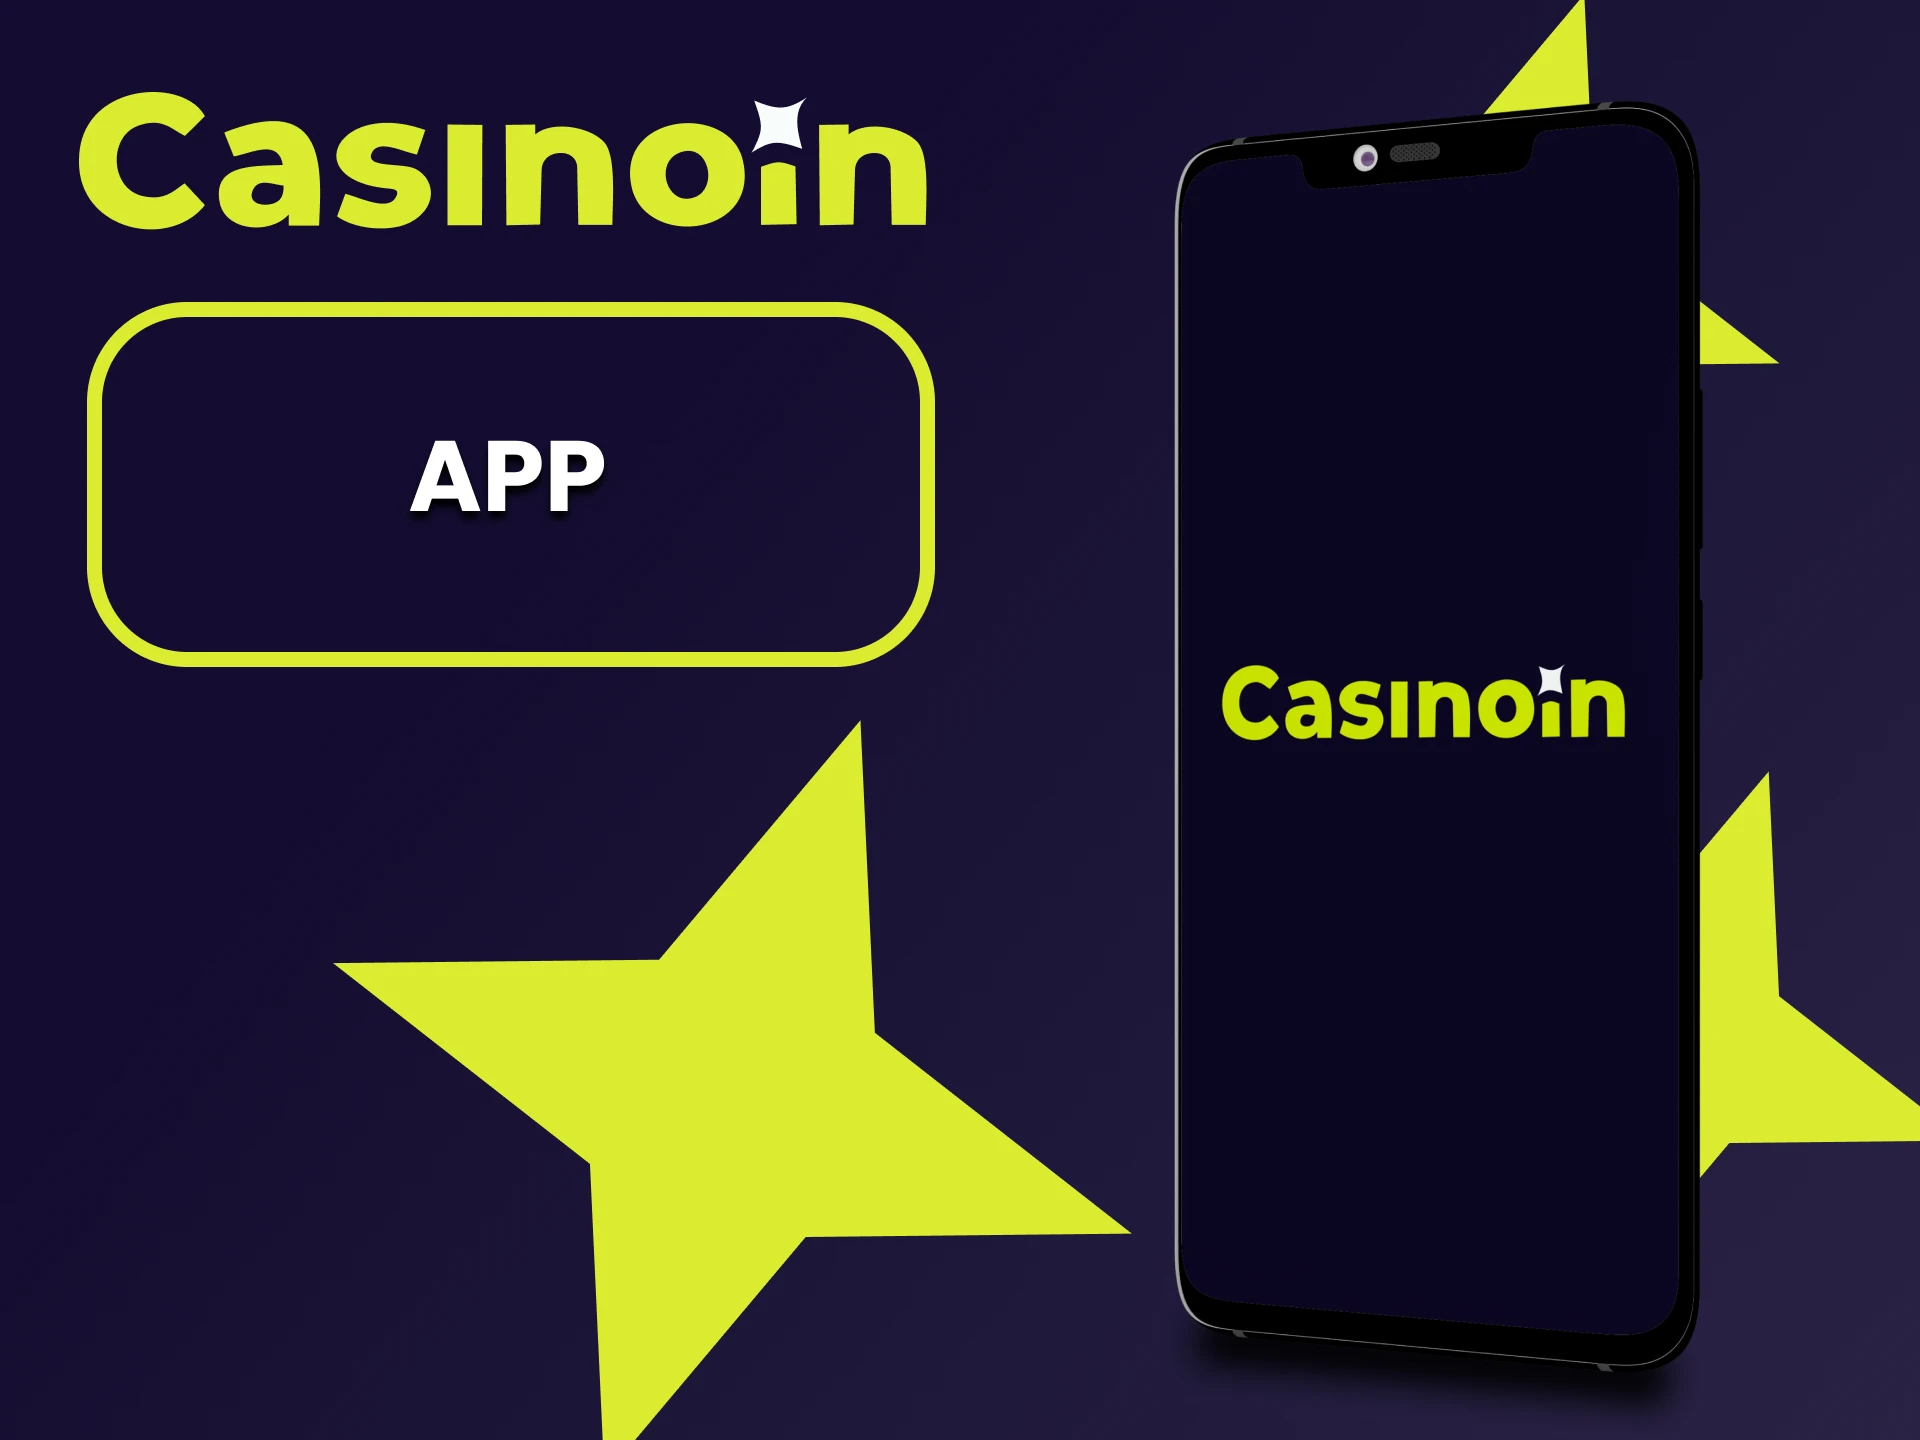 Download the Casinoin app for bets and games.